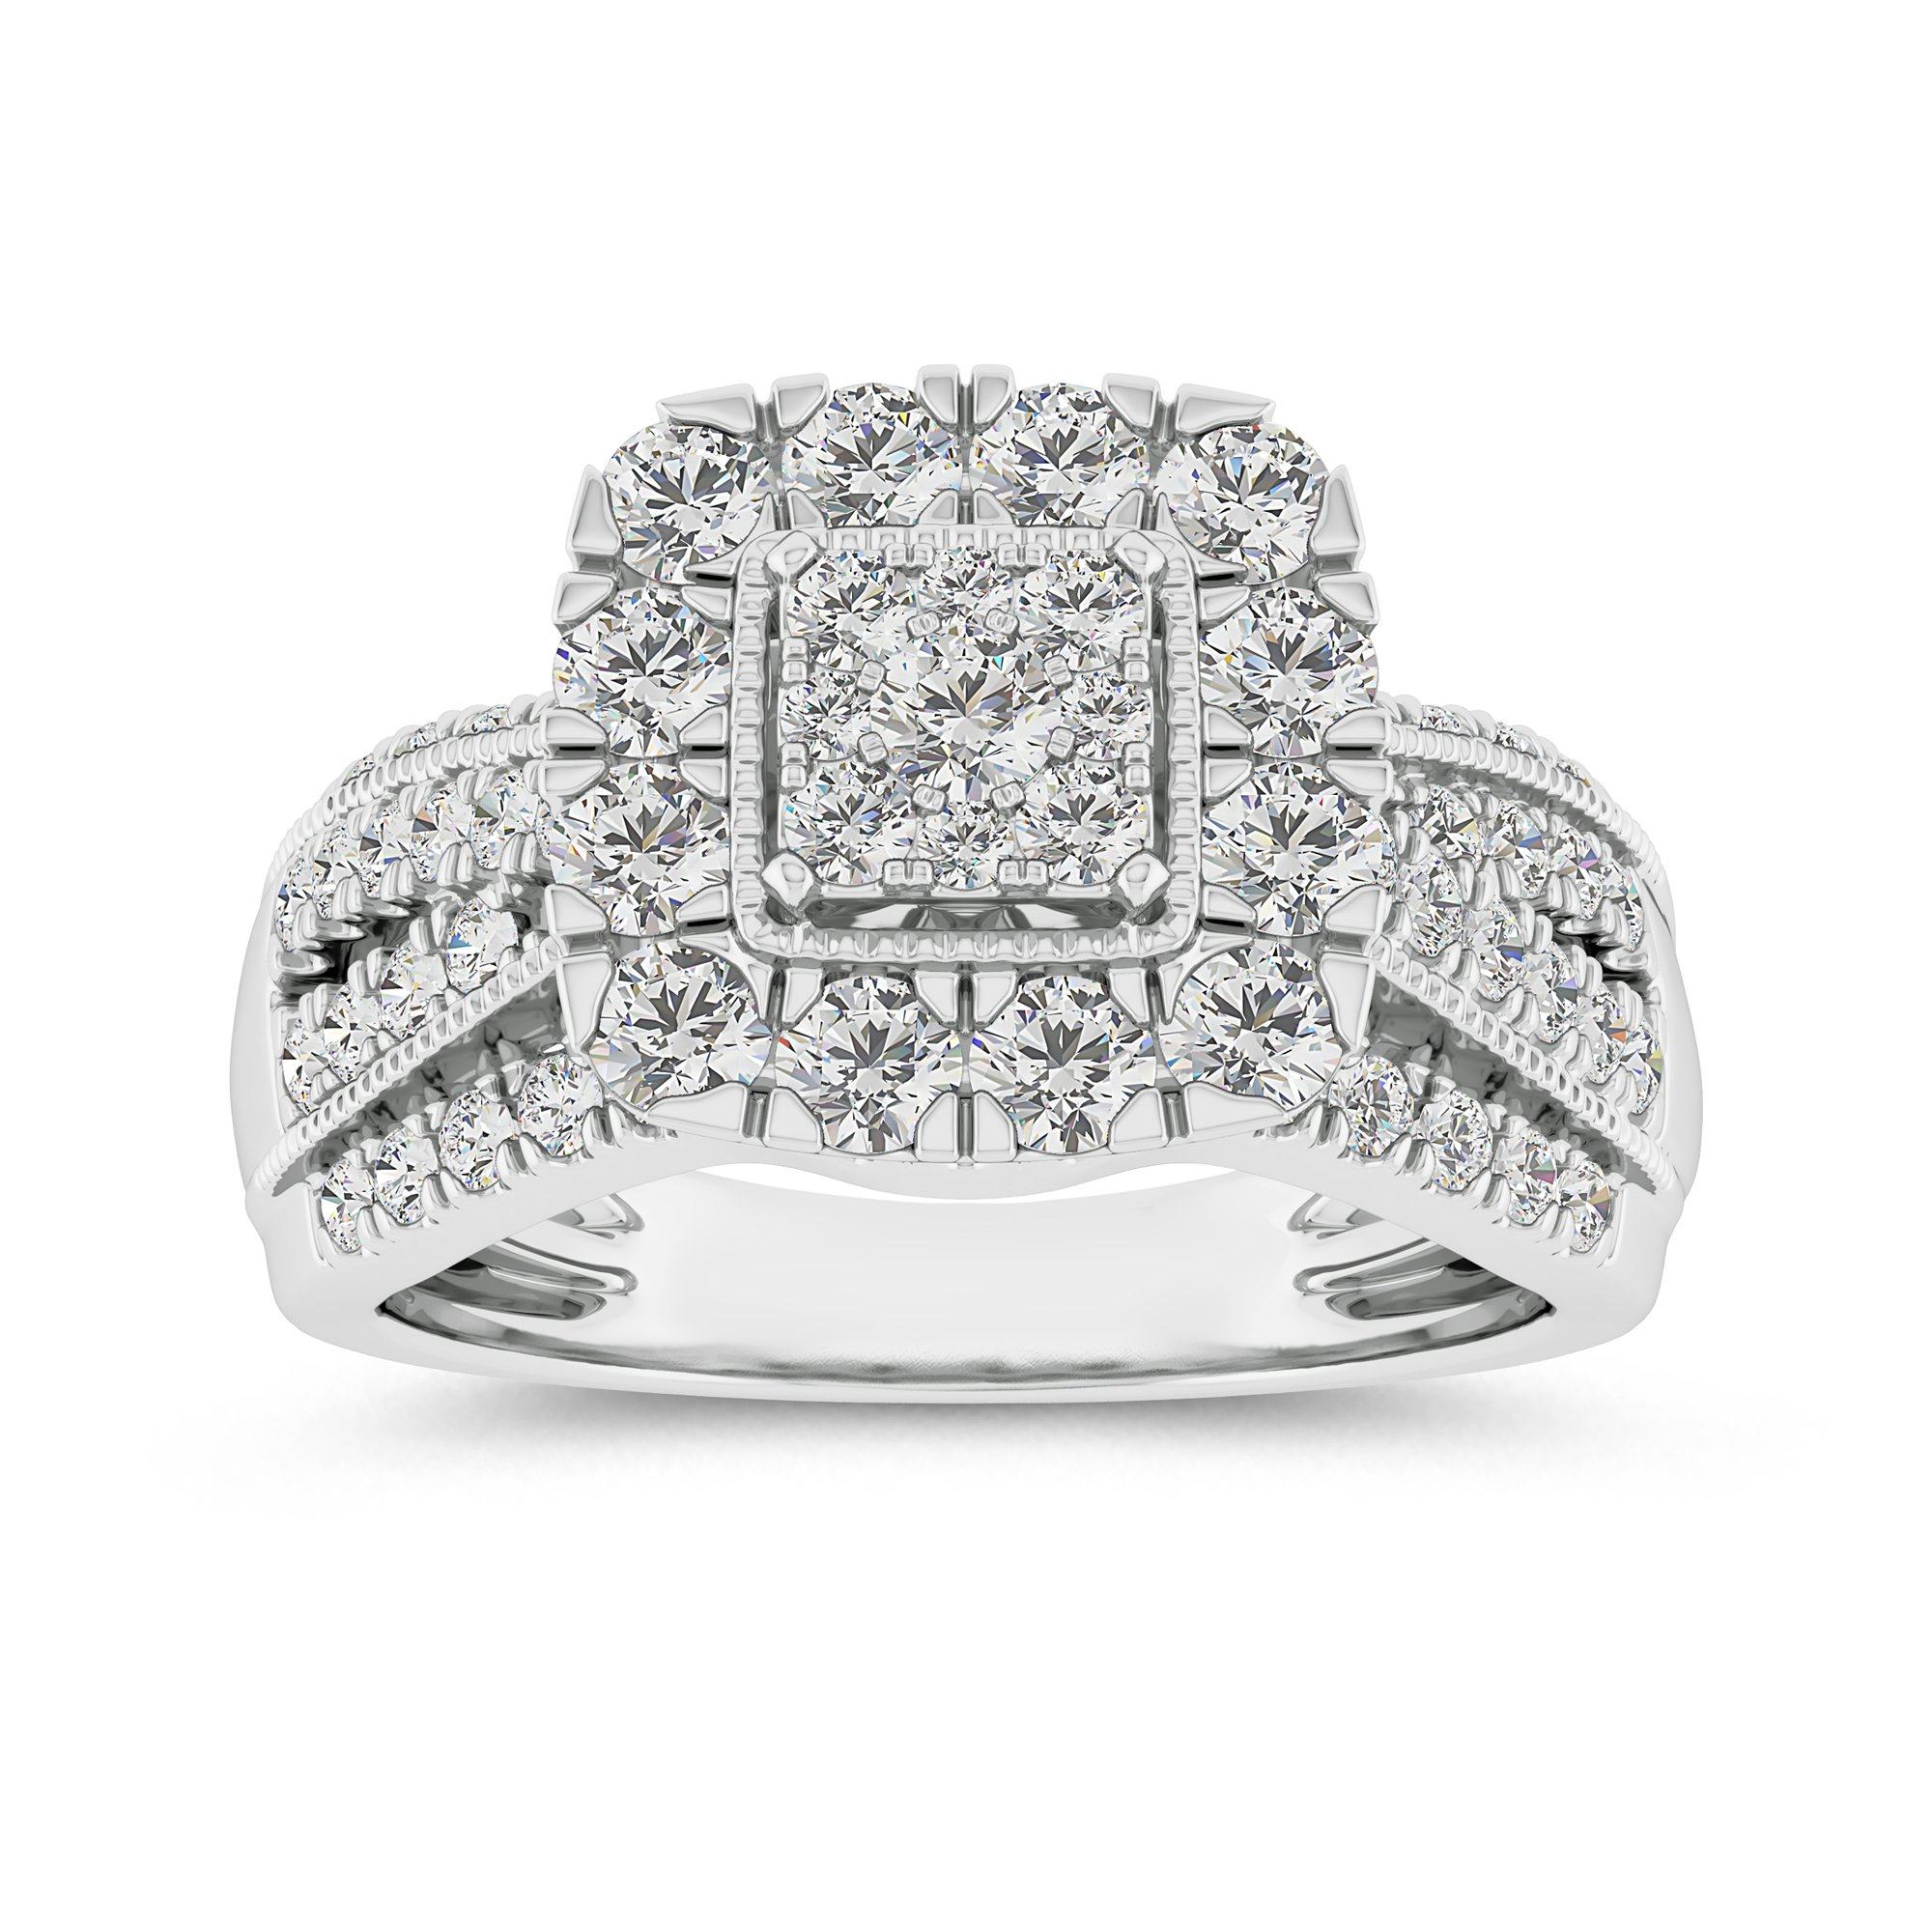 Square Surround Ring with 1.00ct of Diamonds in 9ct White Gold Rings Bevilles 